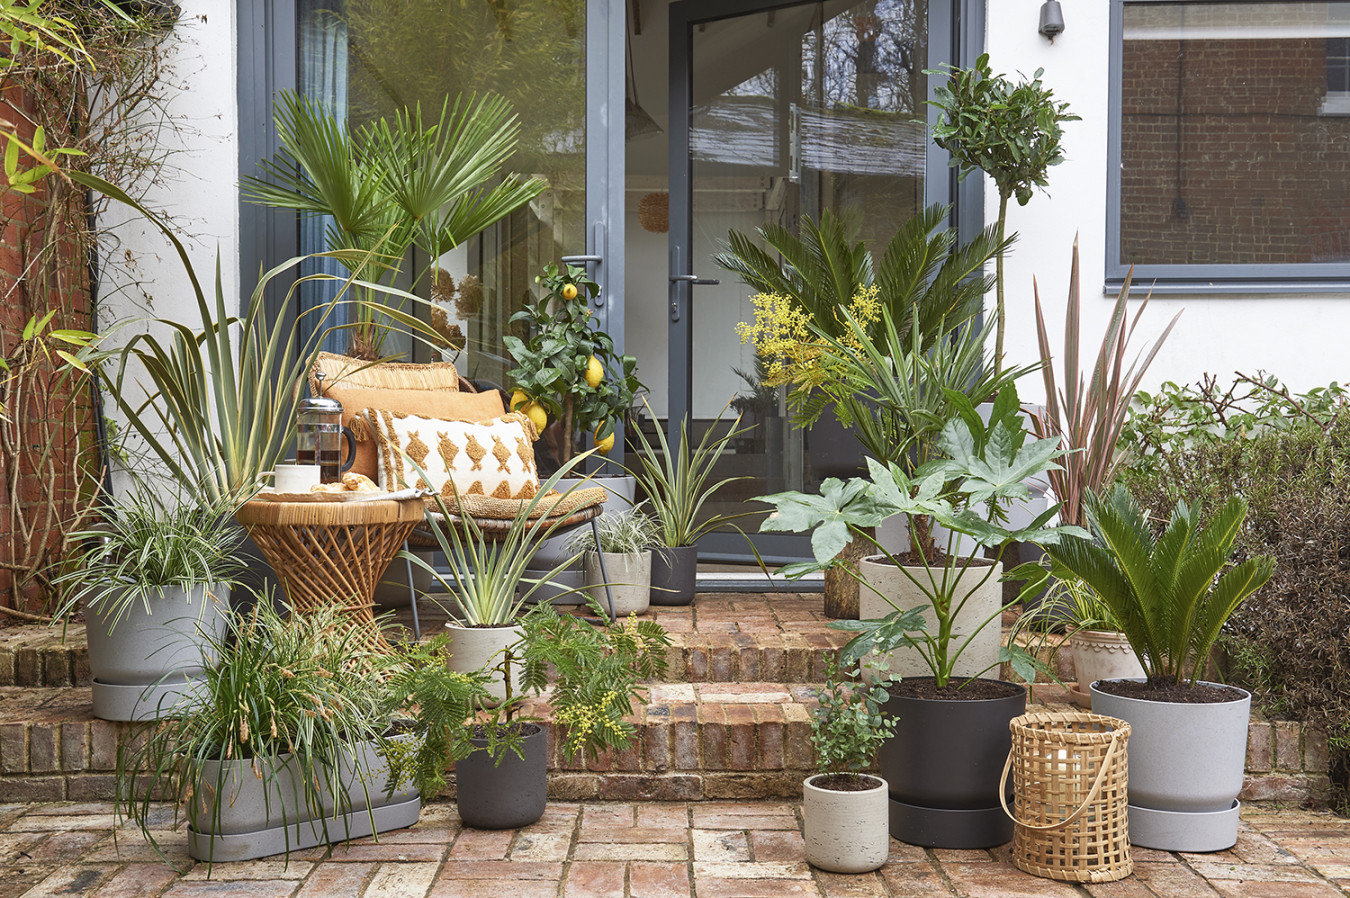 ideas for small gardens on a budget - how to maximise style for